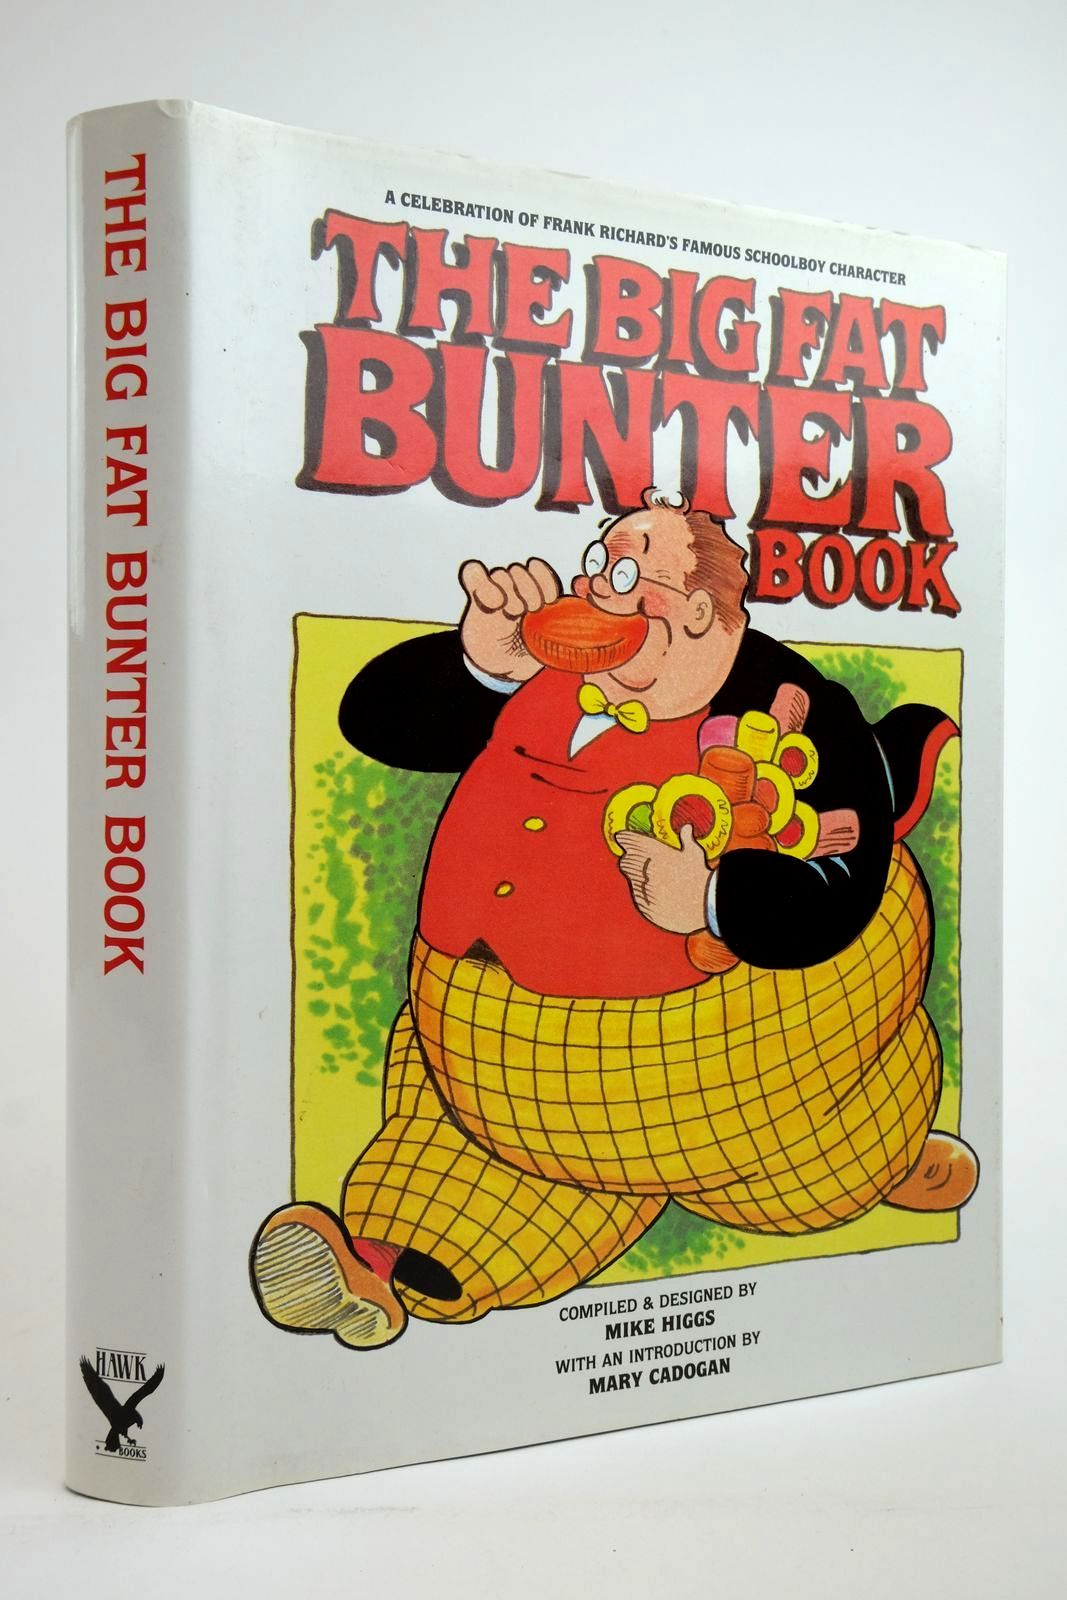 Photo of THE BIG FAT BUNTER BOOK written by Richards, Frank
Higgs, Mike
Cadogan, Mary published by Hawk Books Limited (STOCK CODE: 2135585)  for sale by Stella & Rose's Books